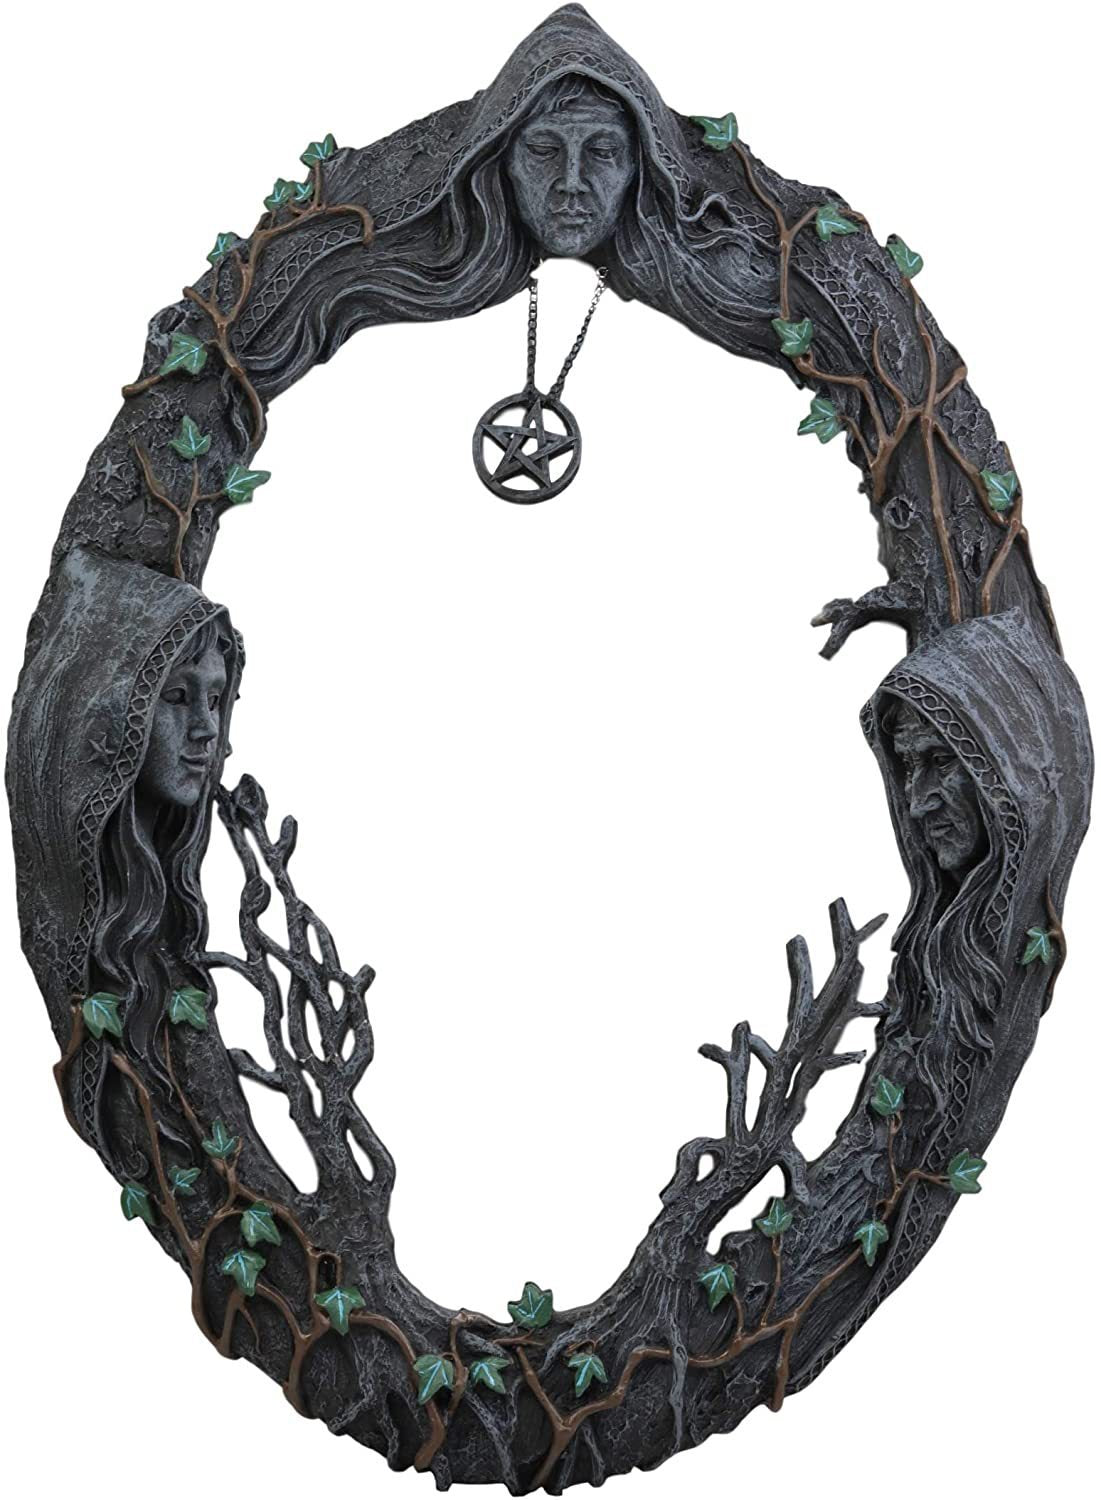 Triple Moon Goddess Mirror With Amulet